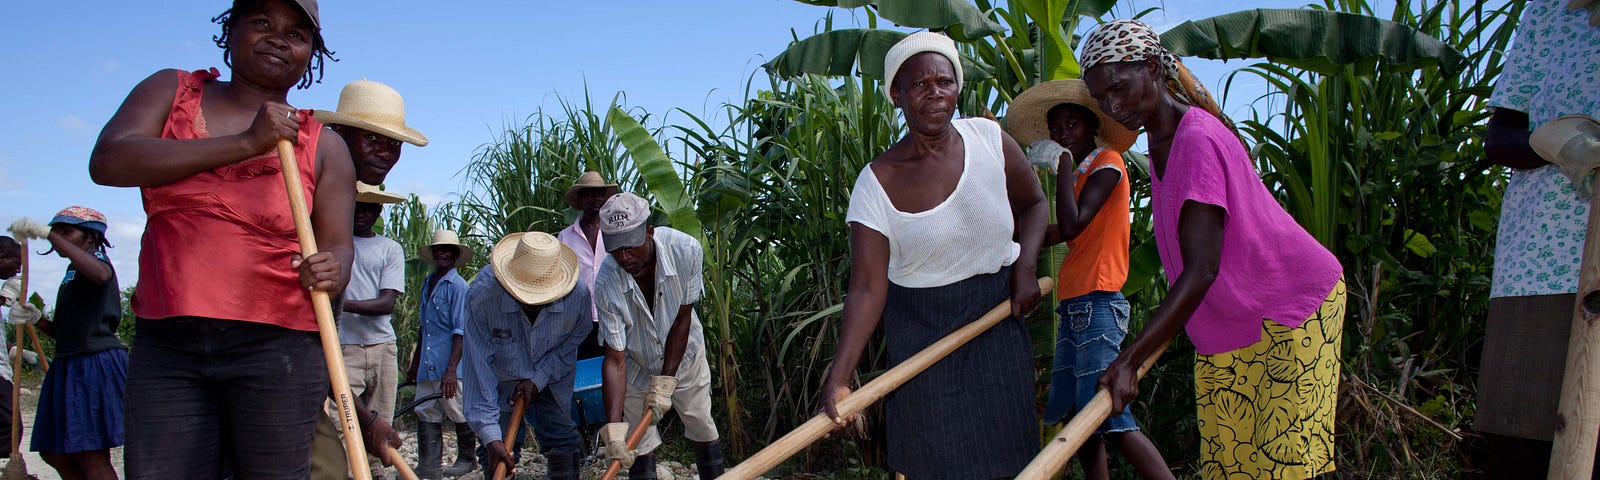 A group of Haitian men and women repair a dirt road in their community. They hold pickaxes, takes, shovels, and other tools.